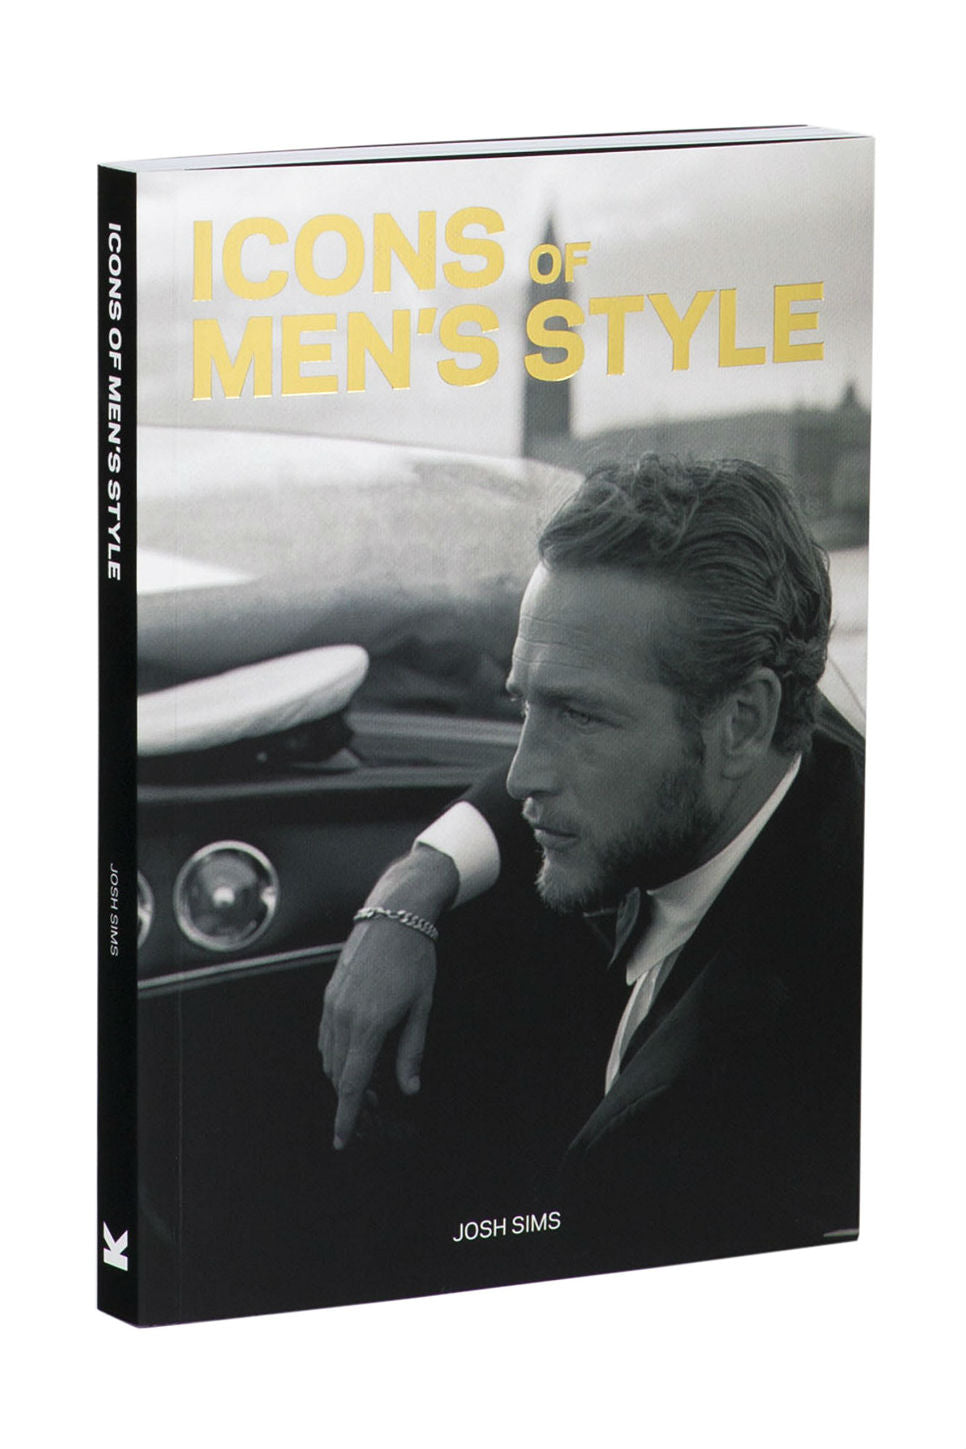 Chronicle - Icons of Men's Style